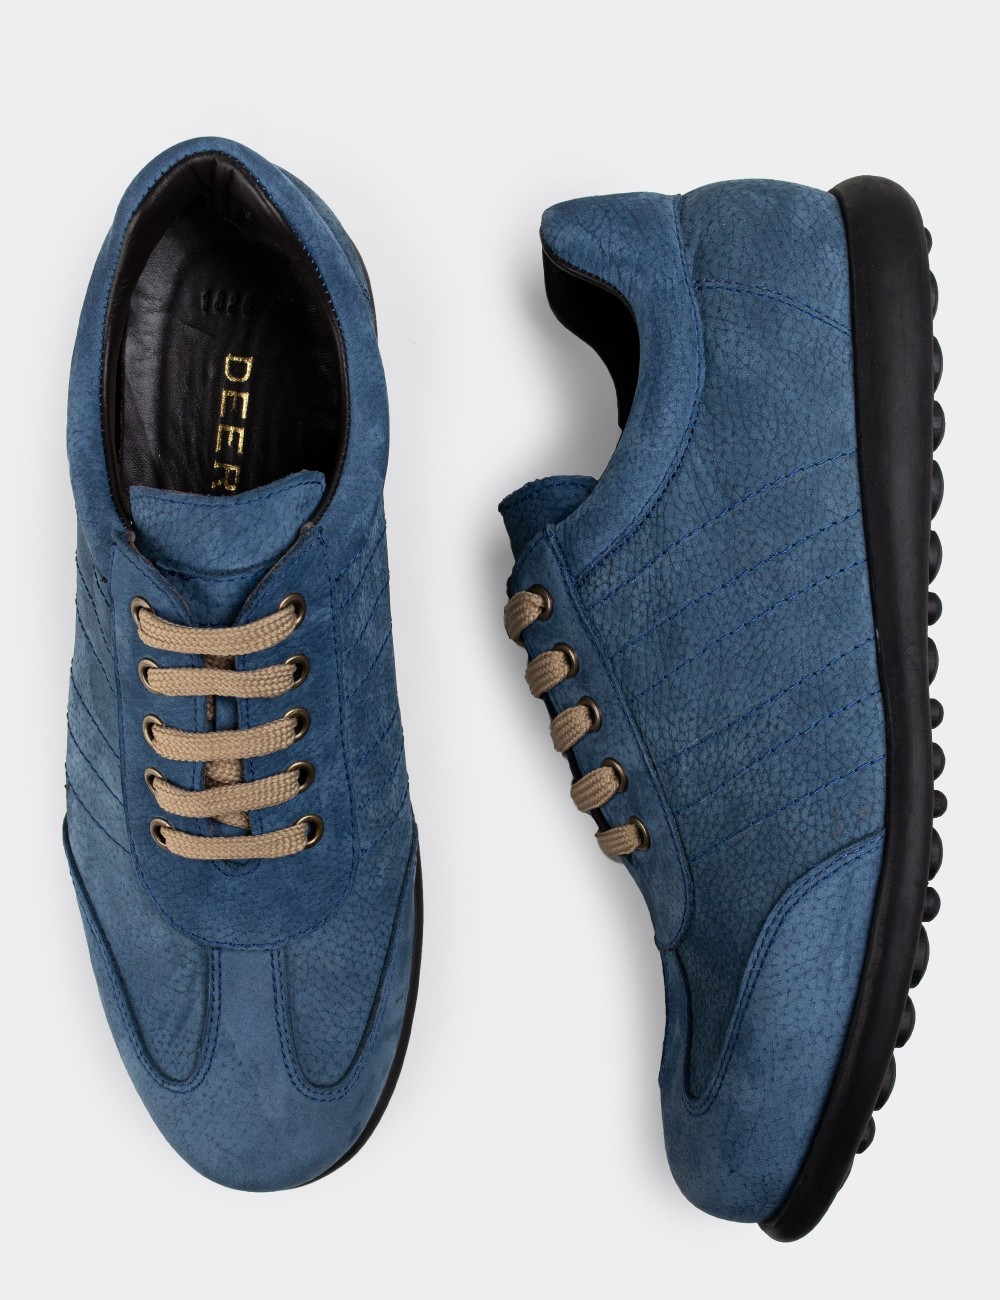 Blue Nubuck Leather Lace-up Shoes - 01826MMVIC01